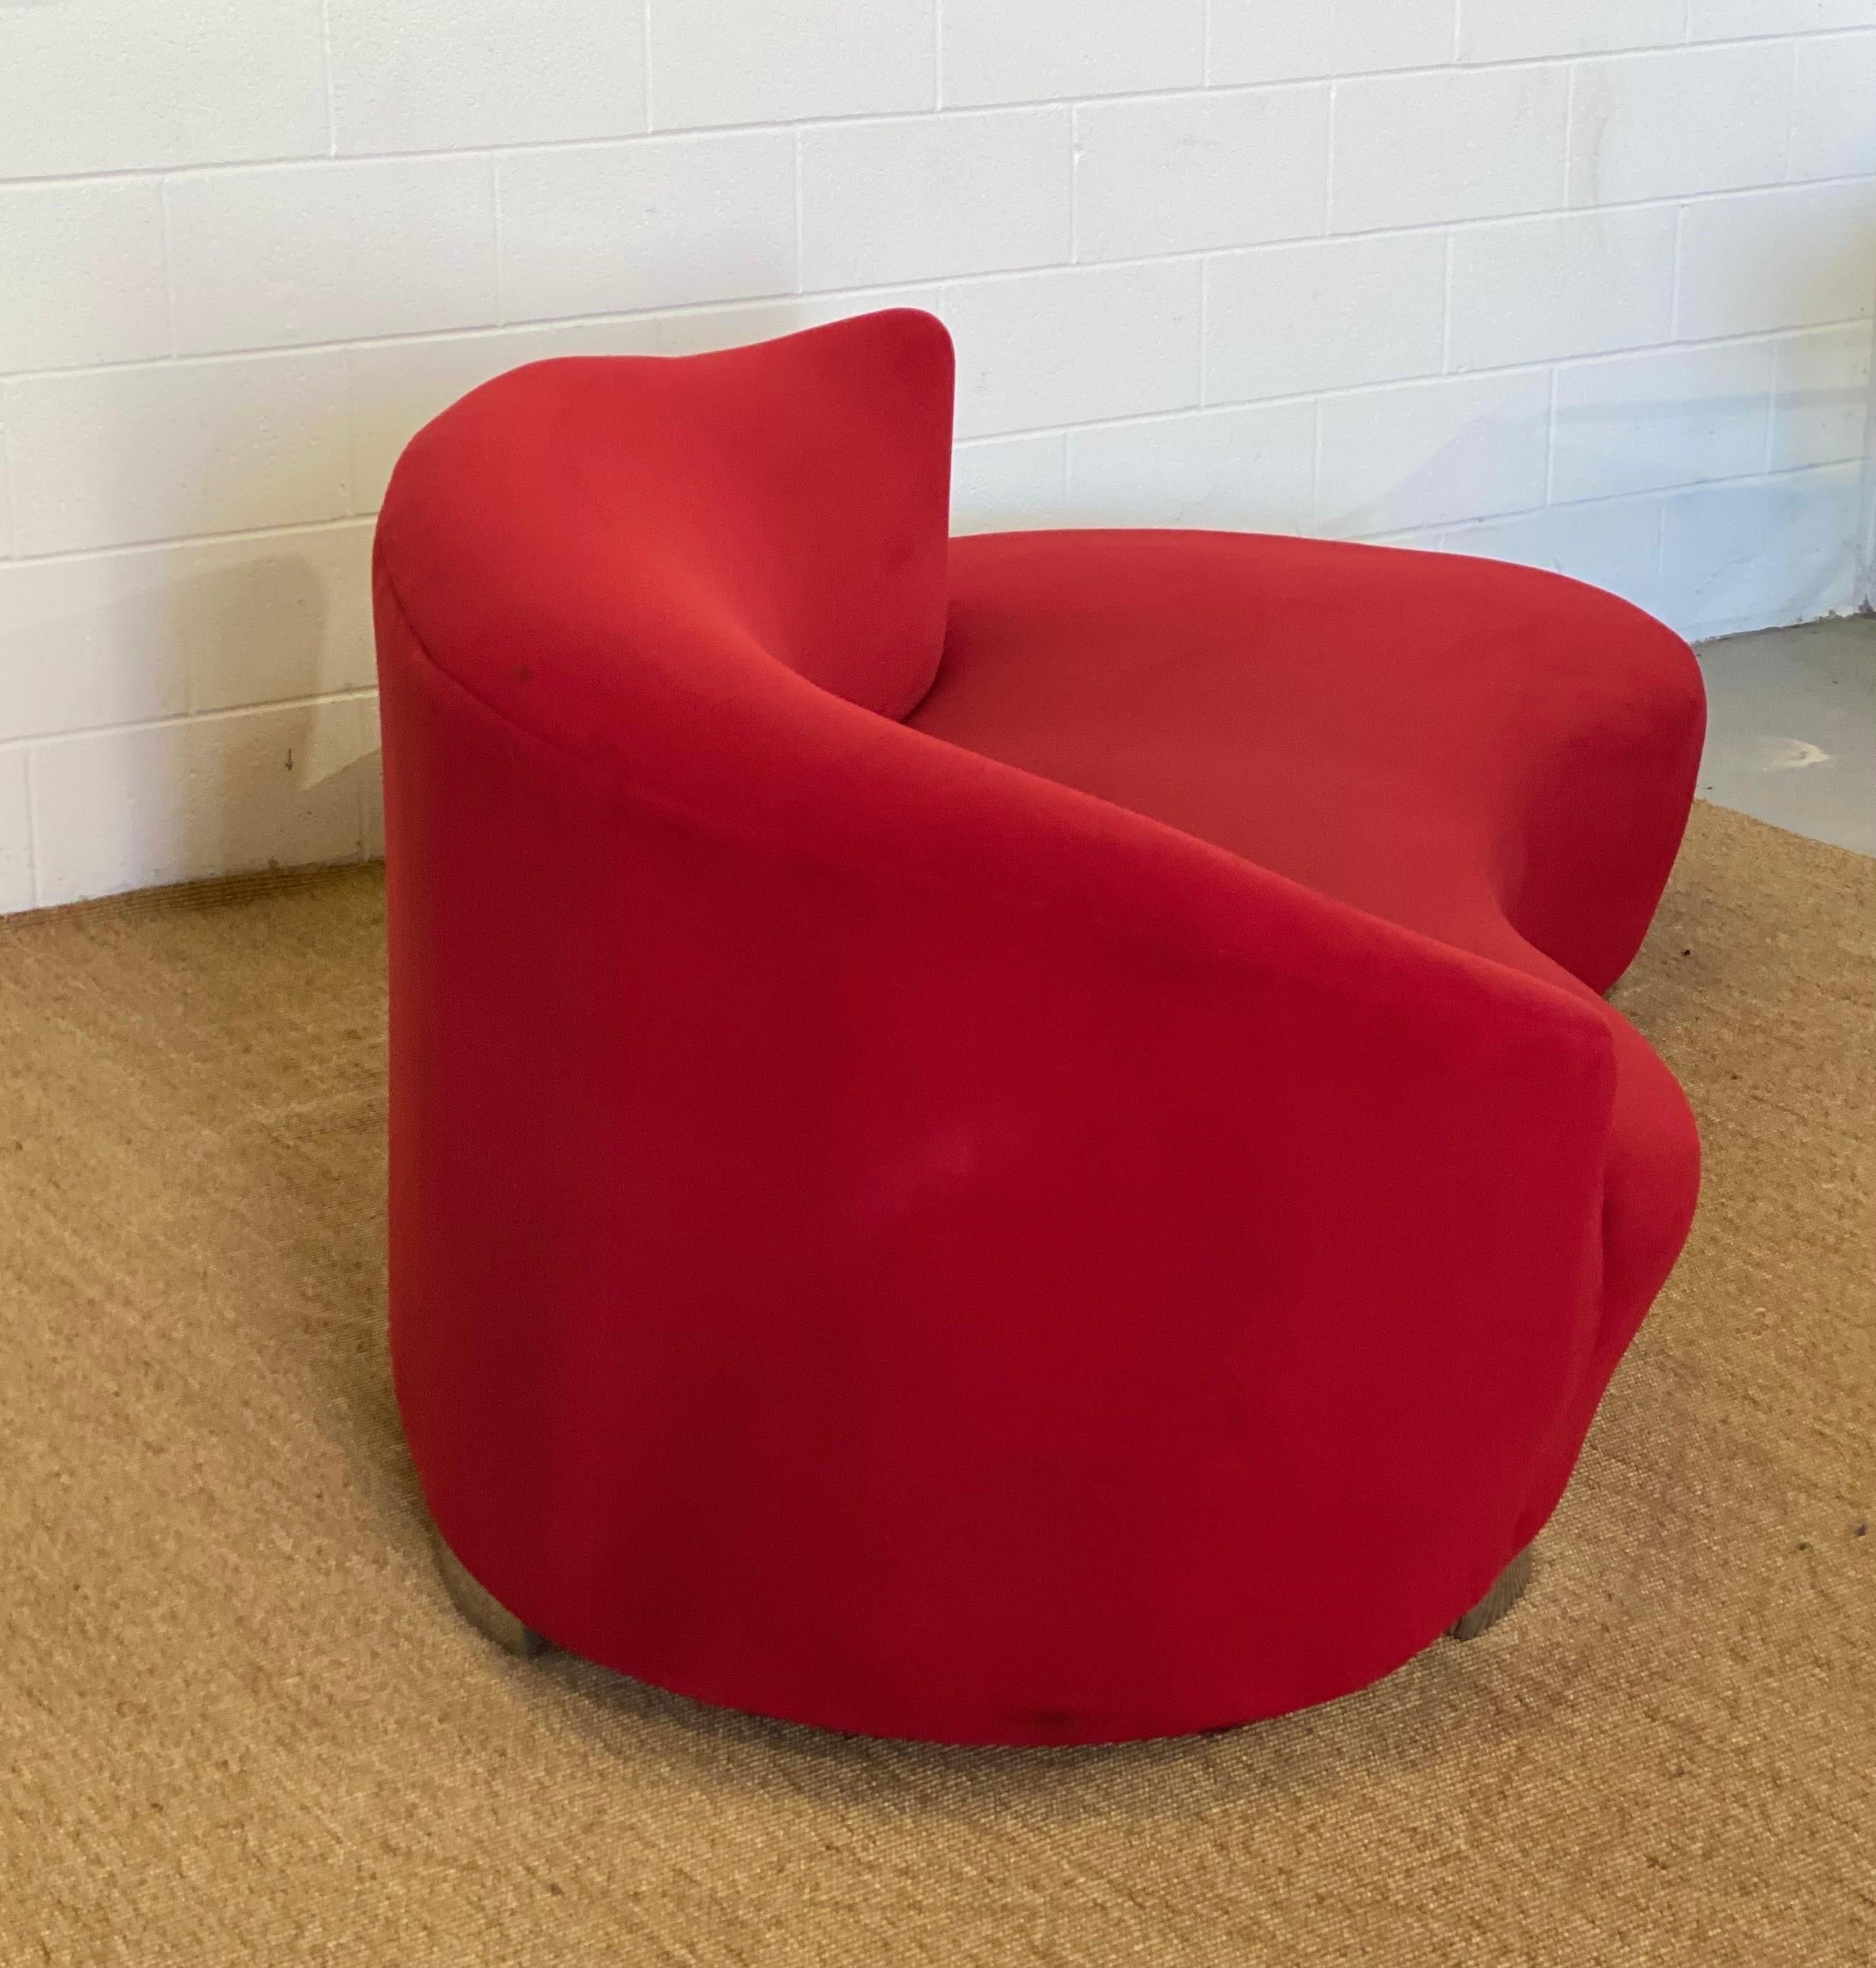 Upholstery 1980s Vintage Curved Cloud Red Sofa For Sale